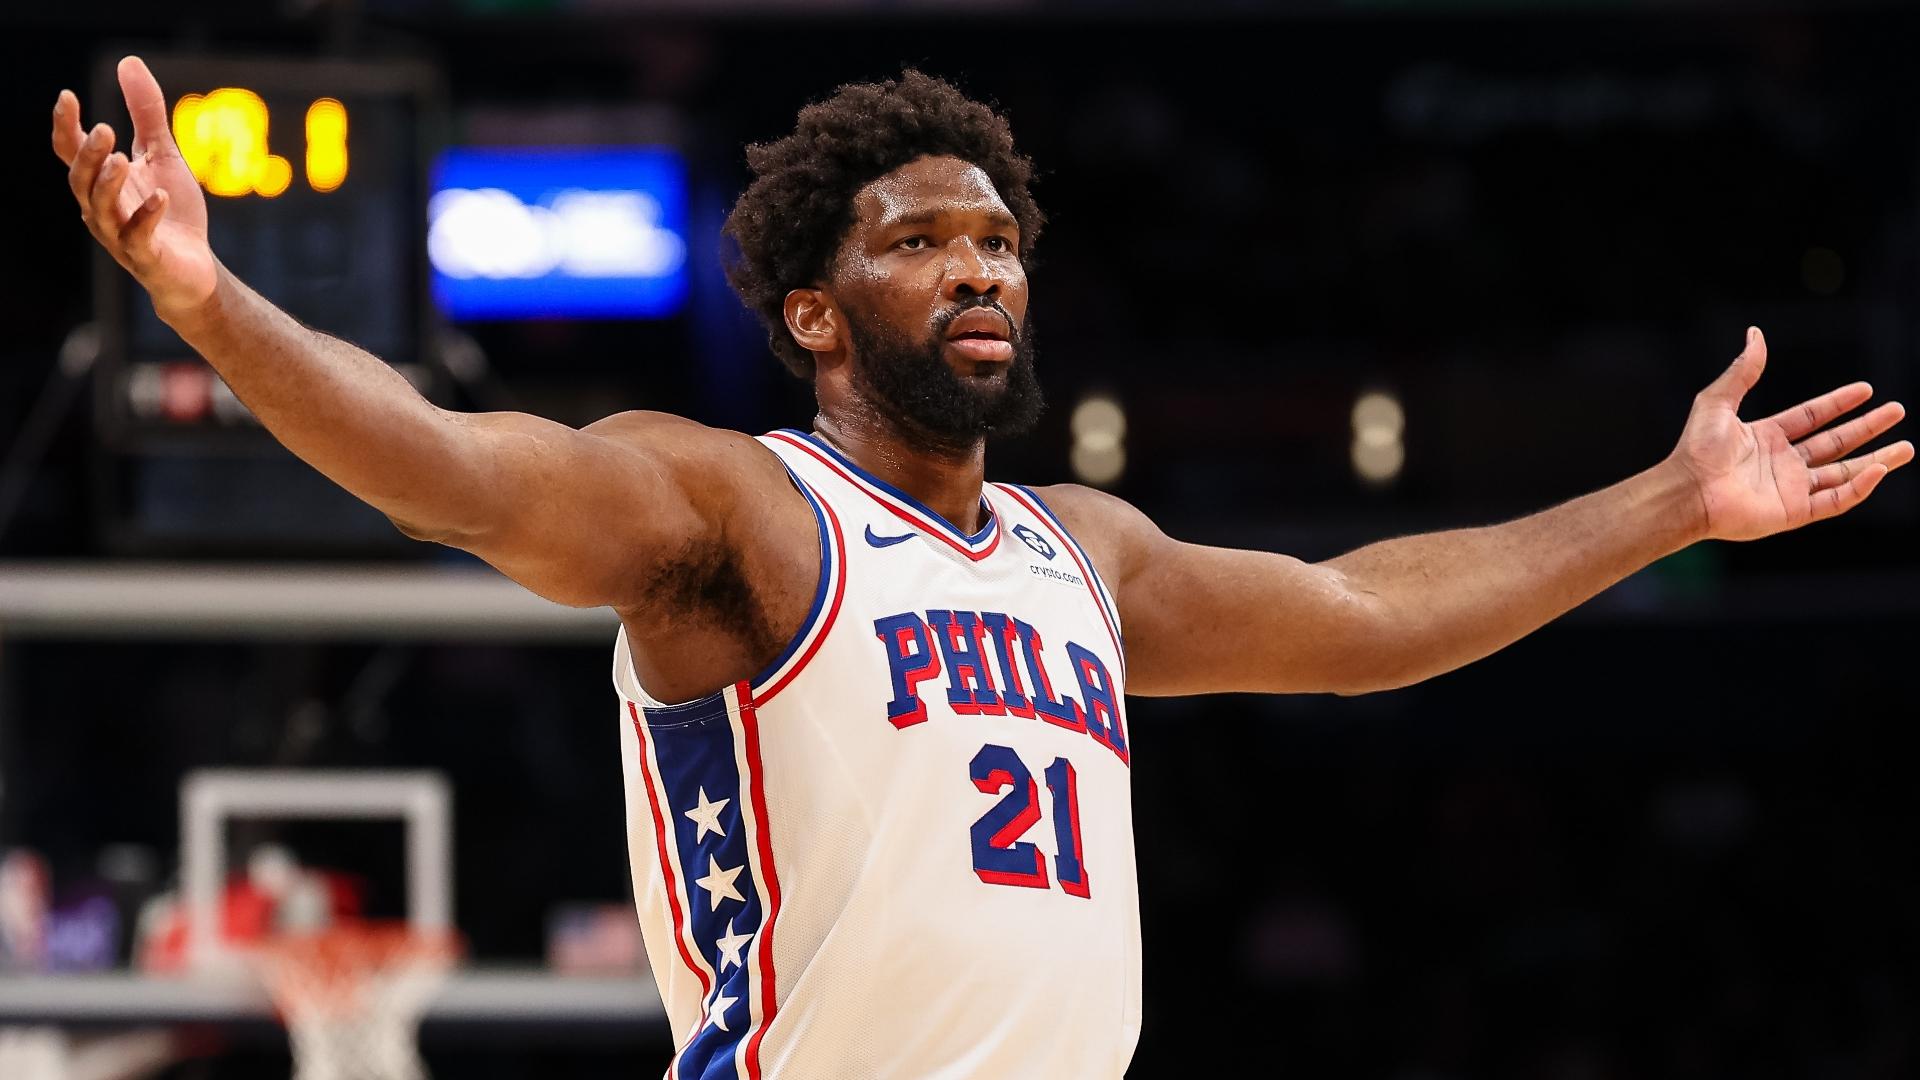  NBA Star Joel Embiid Battles Bell's Palsy But Promises to Keep Fighting: A Look at His Courageous Playoff Journey